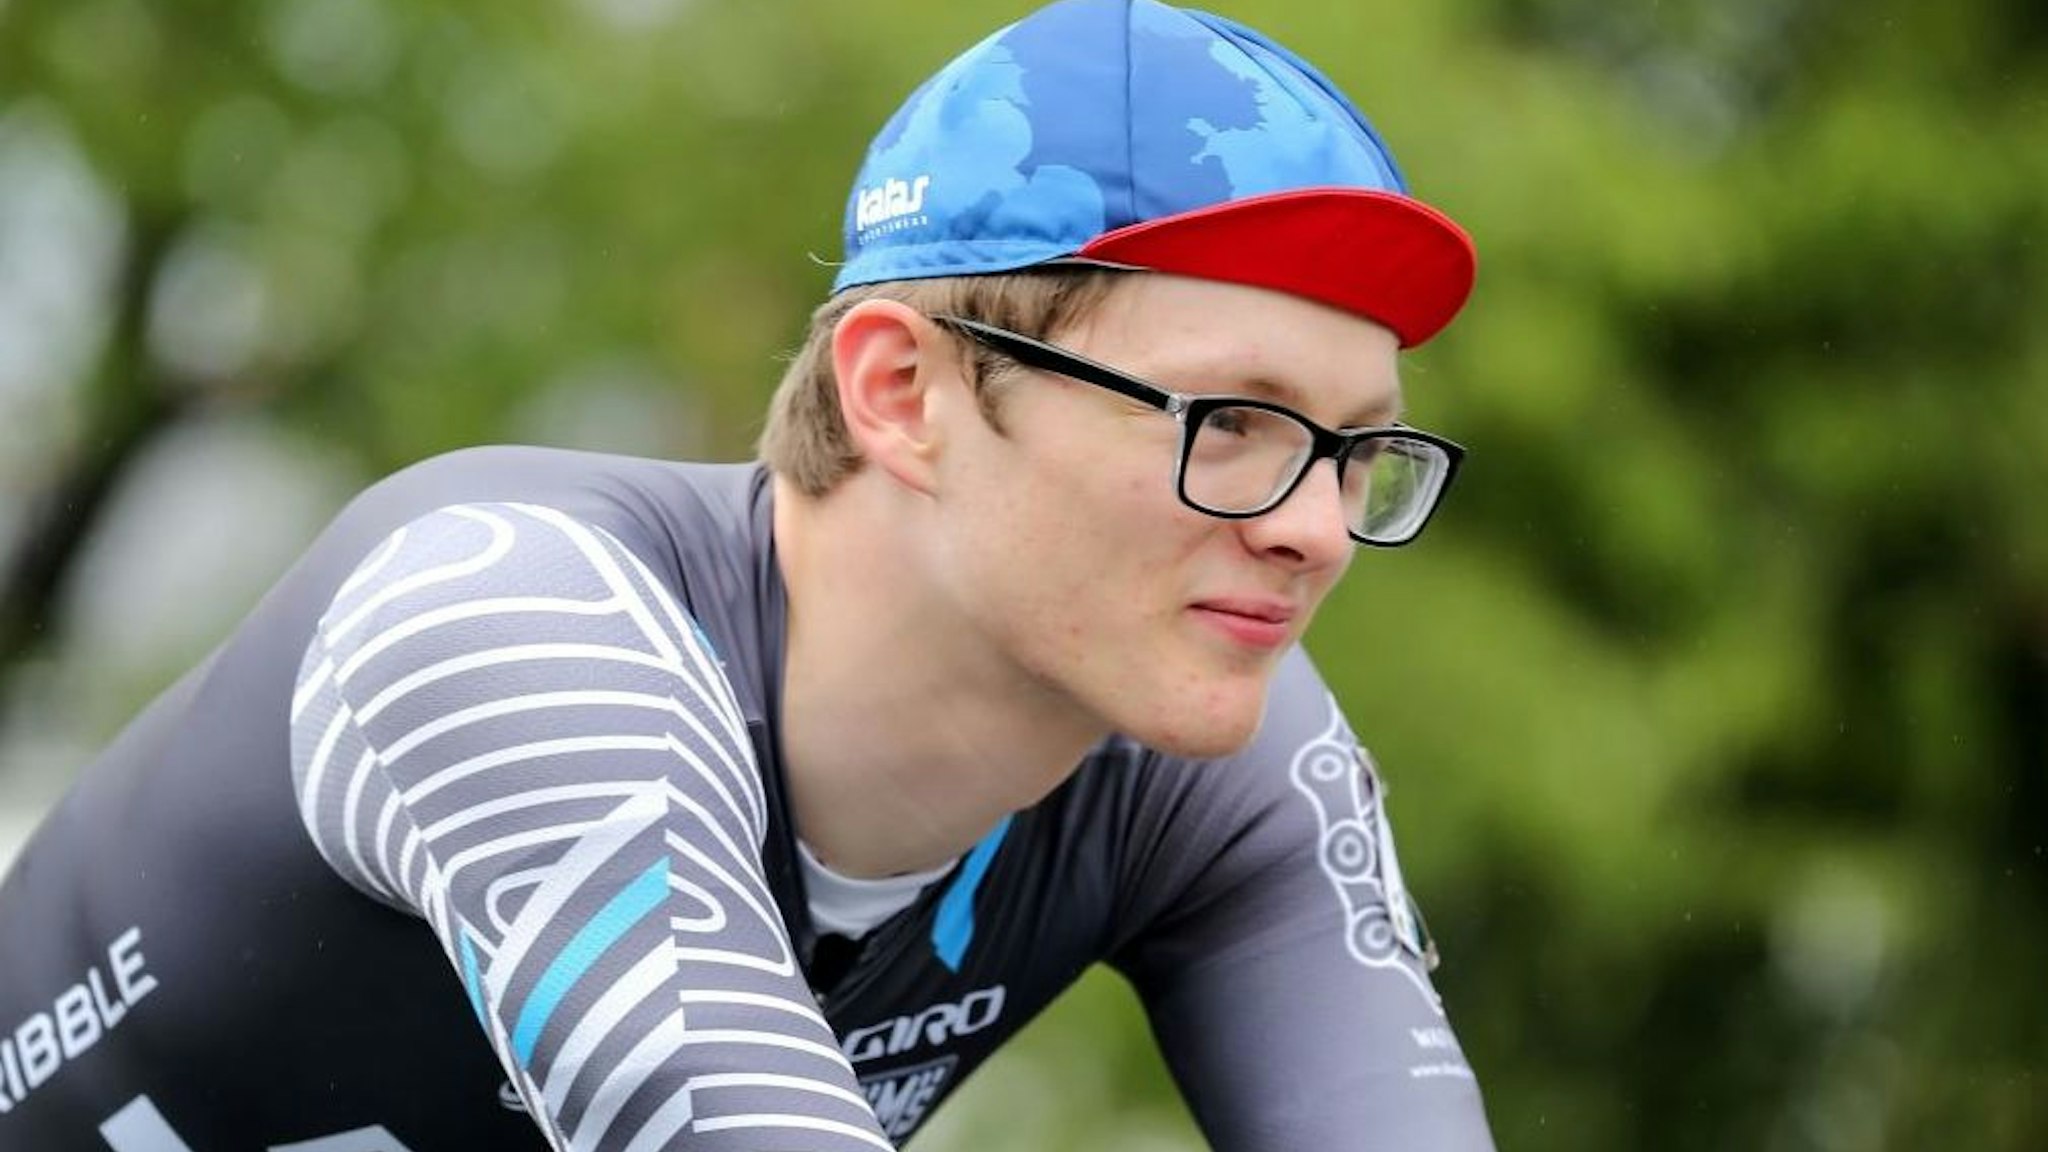 Zach Bridges prepares to race in stage 5 of the Junior tour of Wales on August 26, 2018 in Abergavenny, Wales, United Kingdom. In October 2020 Zach Bridges the 19-year-old, from Cwmbran in Wales, came out as transgender and now identifies as Emily Bridges.